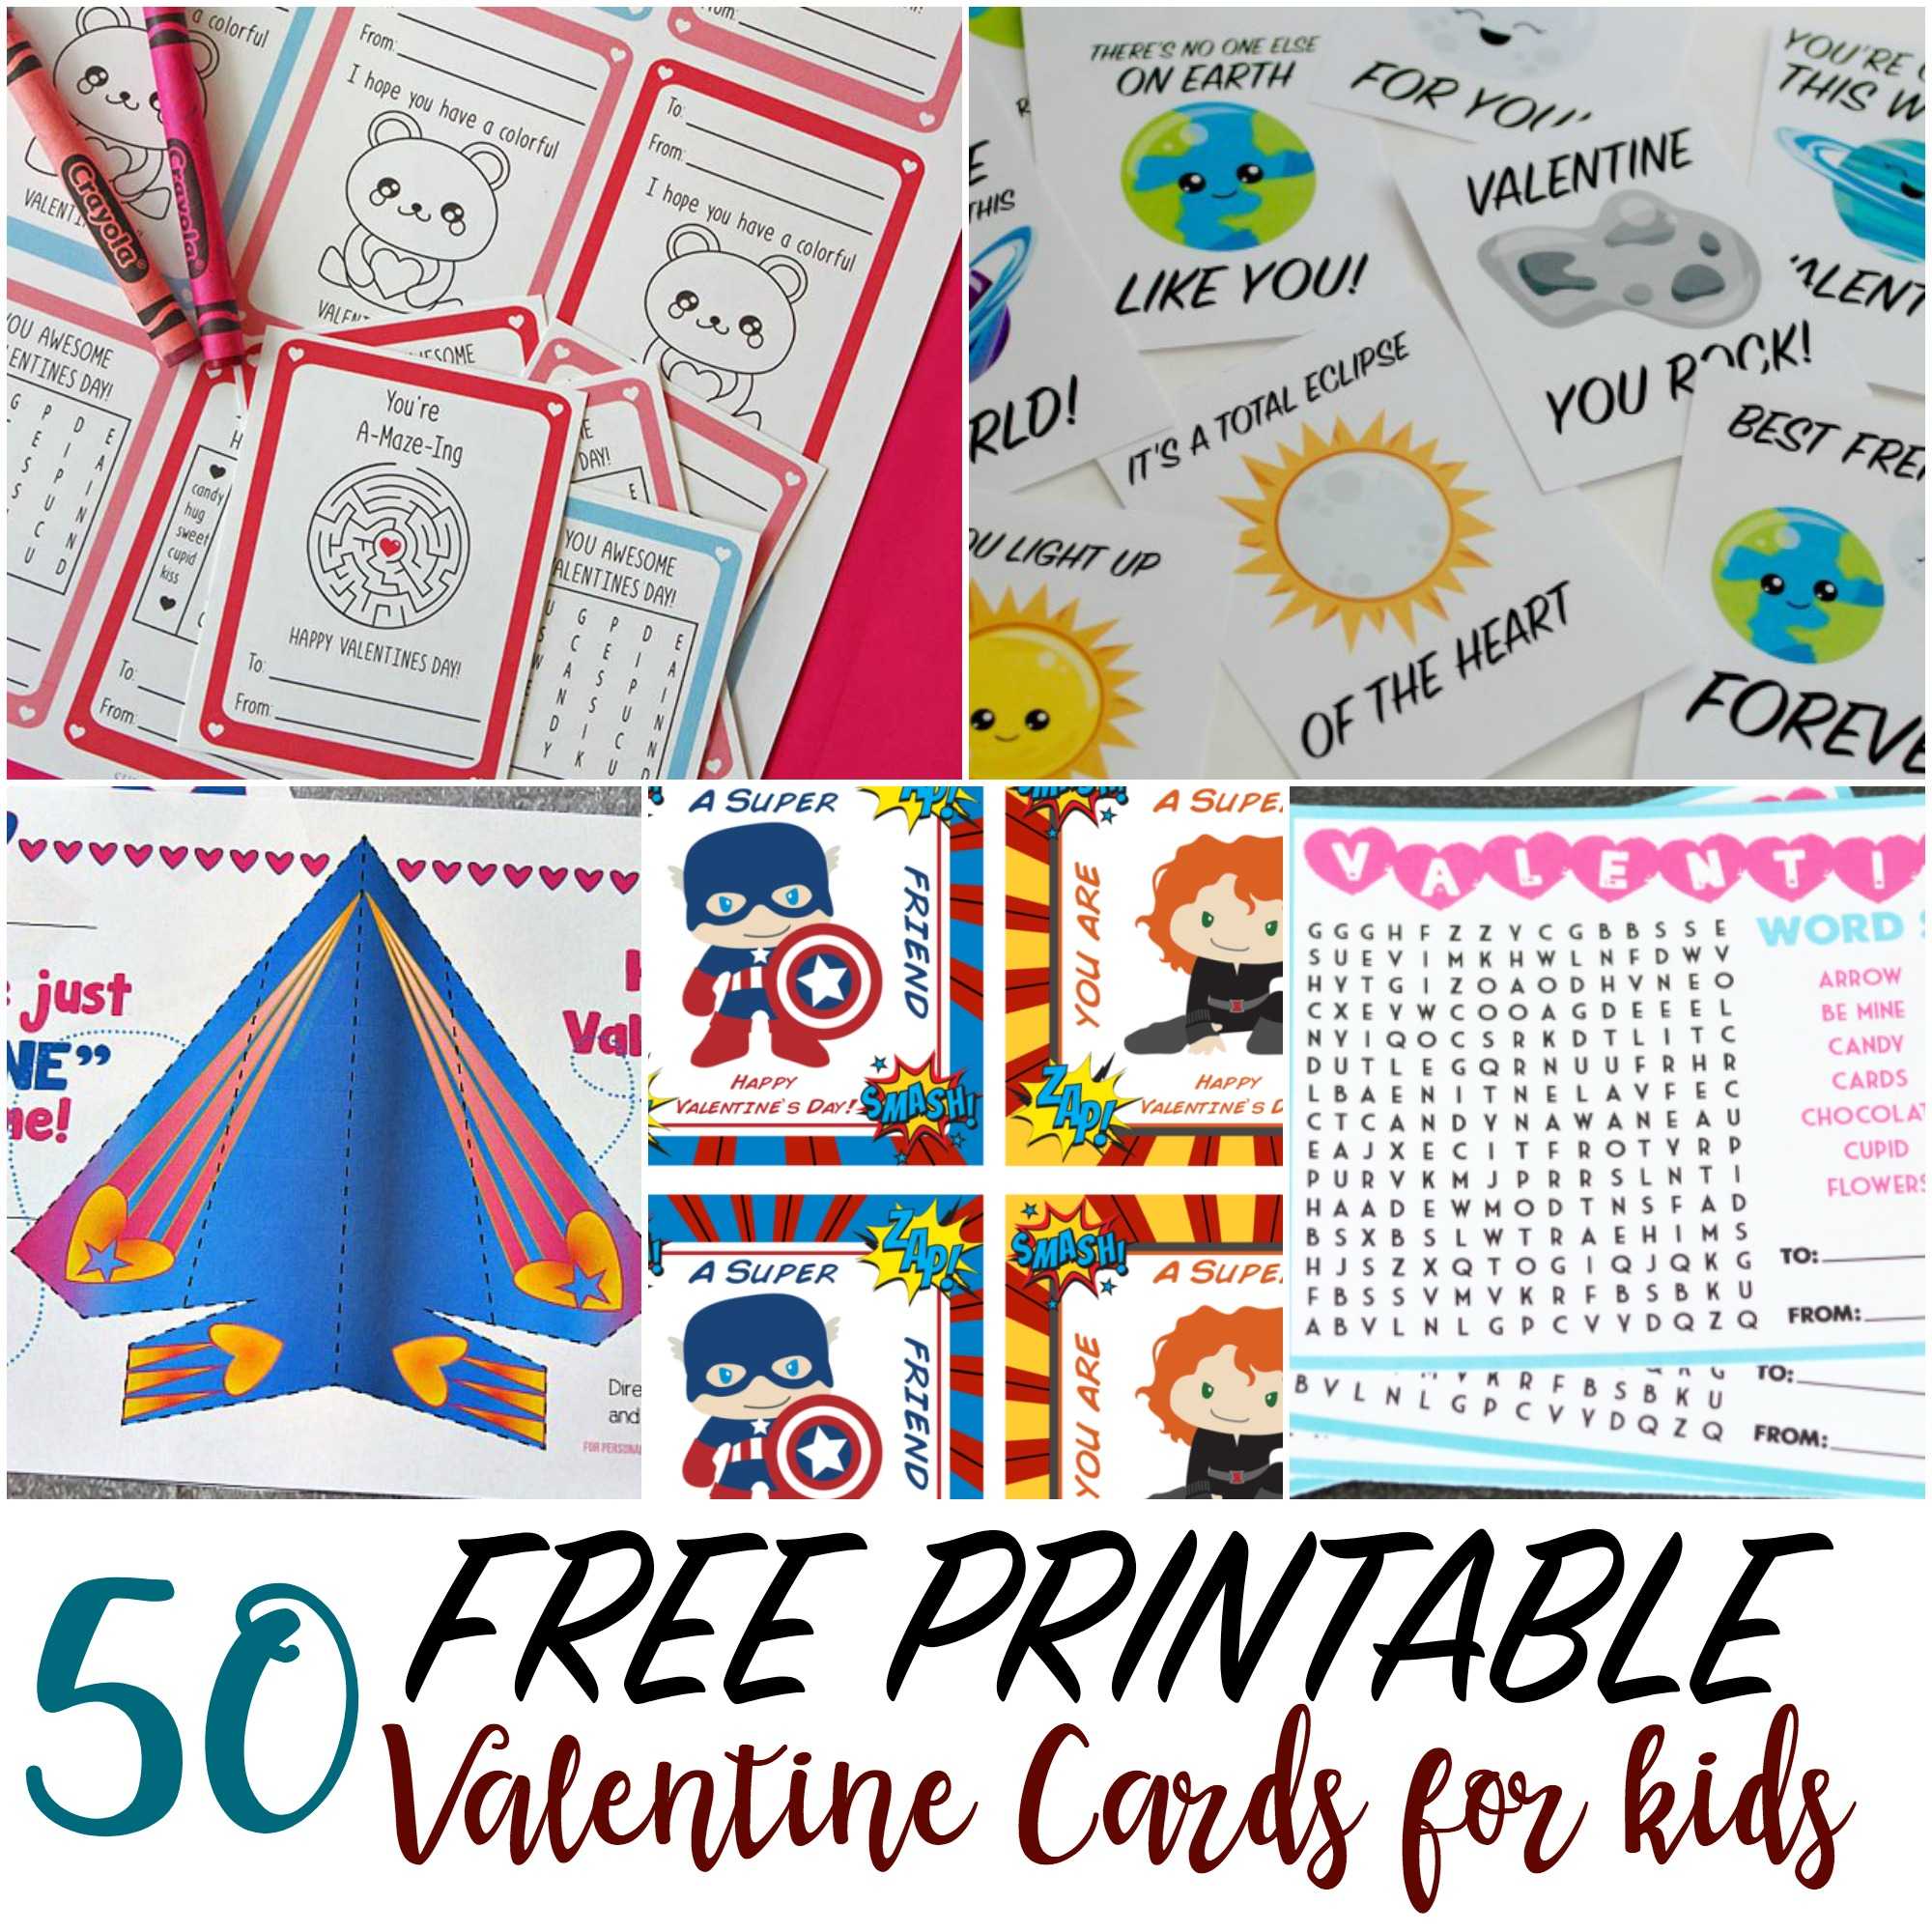 50 Printable Valentine Cards For Kids Pertaining To Valentine Card Template For Kids